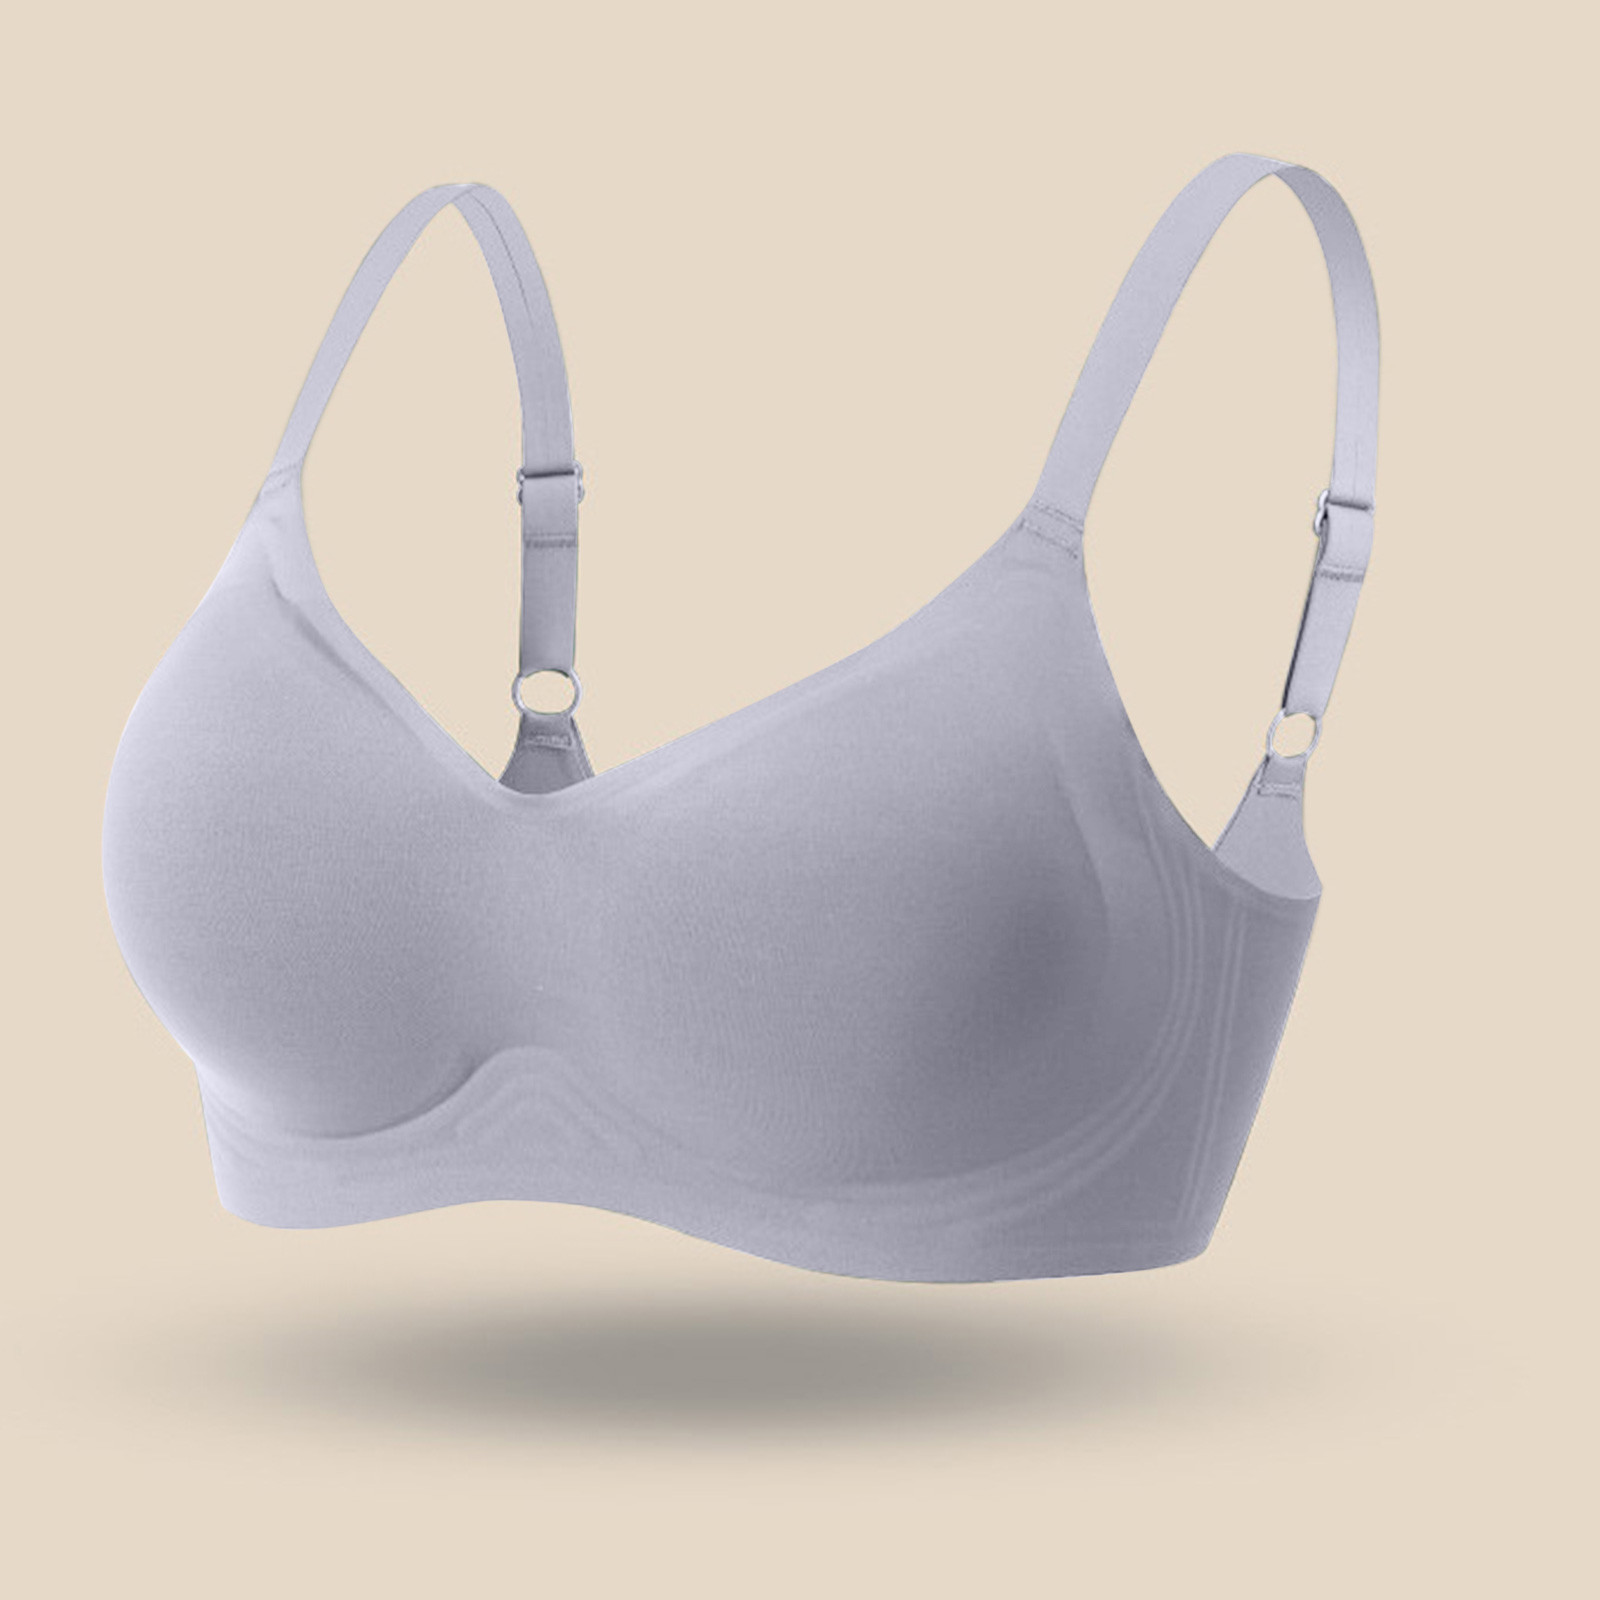 Fnochy Bras Gifts for Women Woman Sexy Ladies Bra without Steel Rings ...